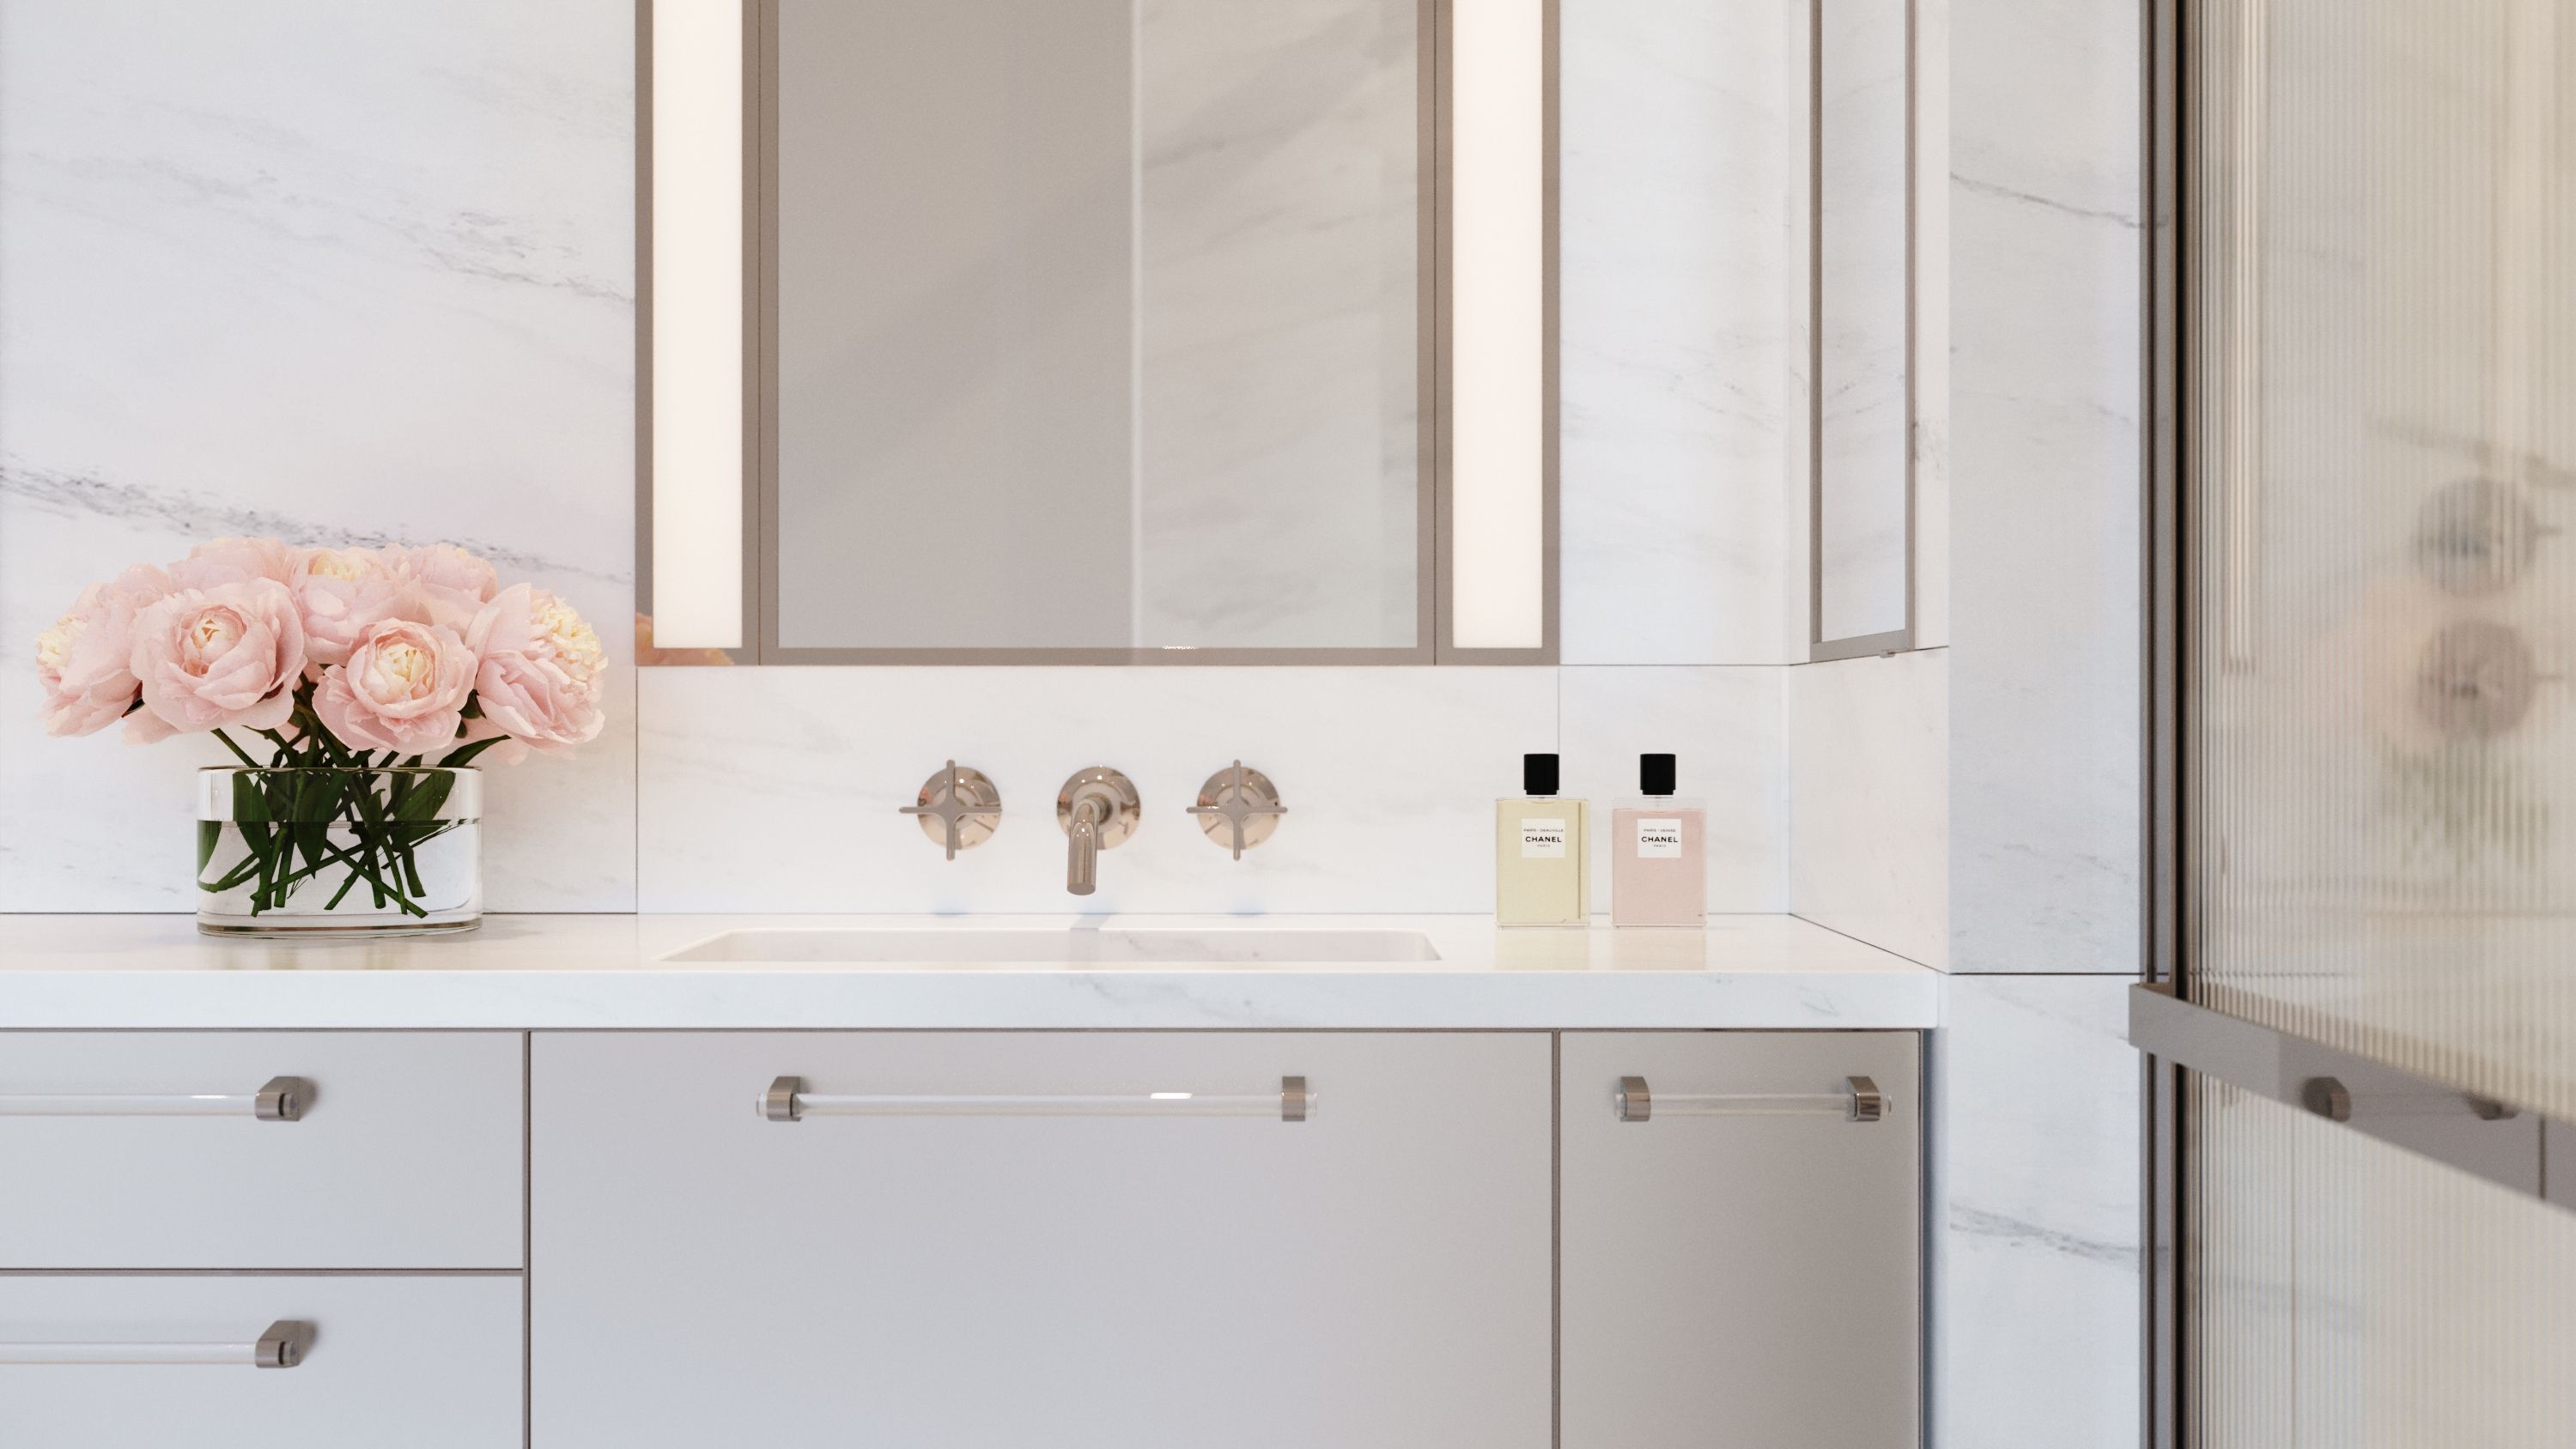 Luxurious details include Dornbracht Vaia fittings in polished nickel, custom recessed medicine cabinets, and vanities clad in acid etched glass